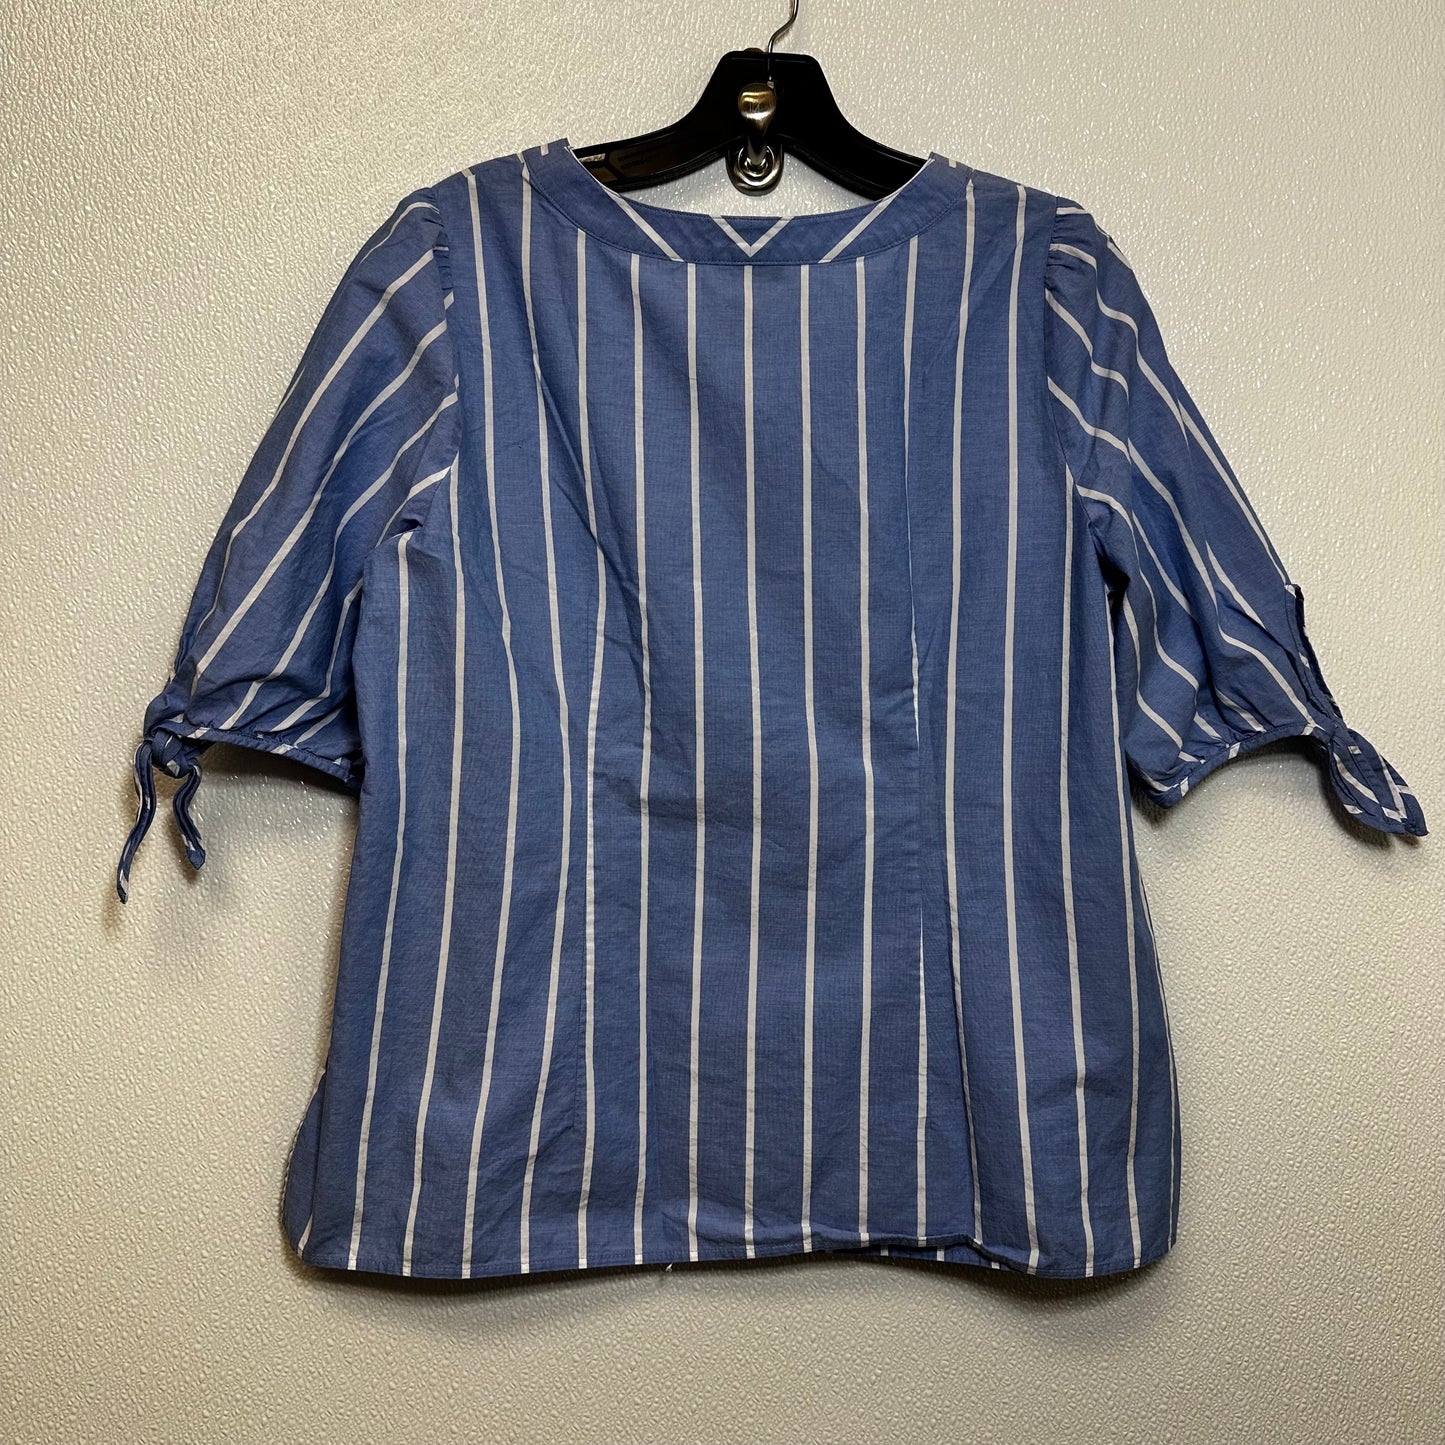 Striped Top Short Sleeve Talbots O, Size M